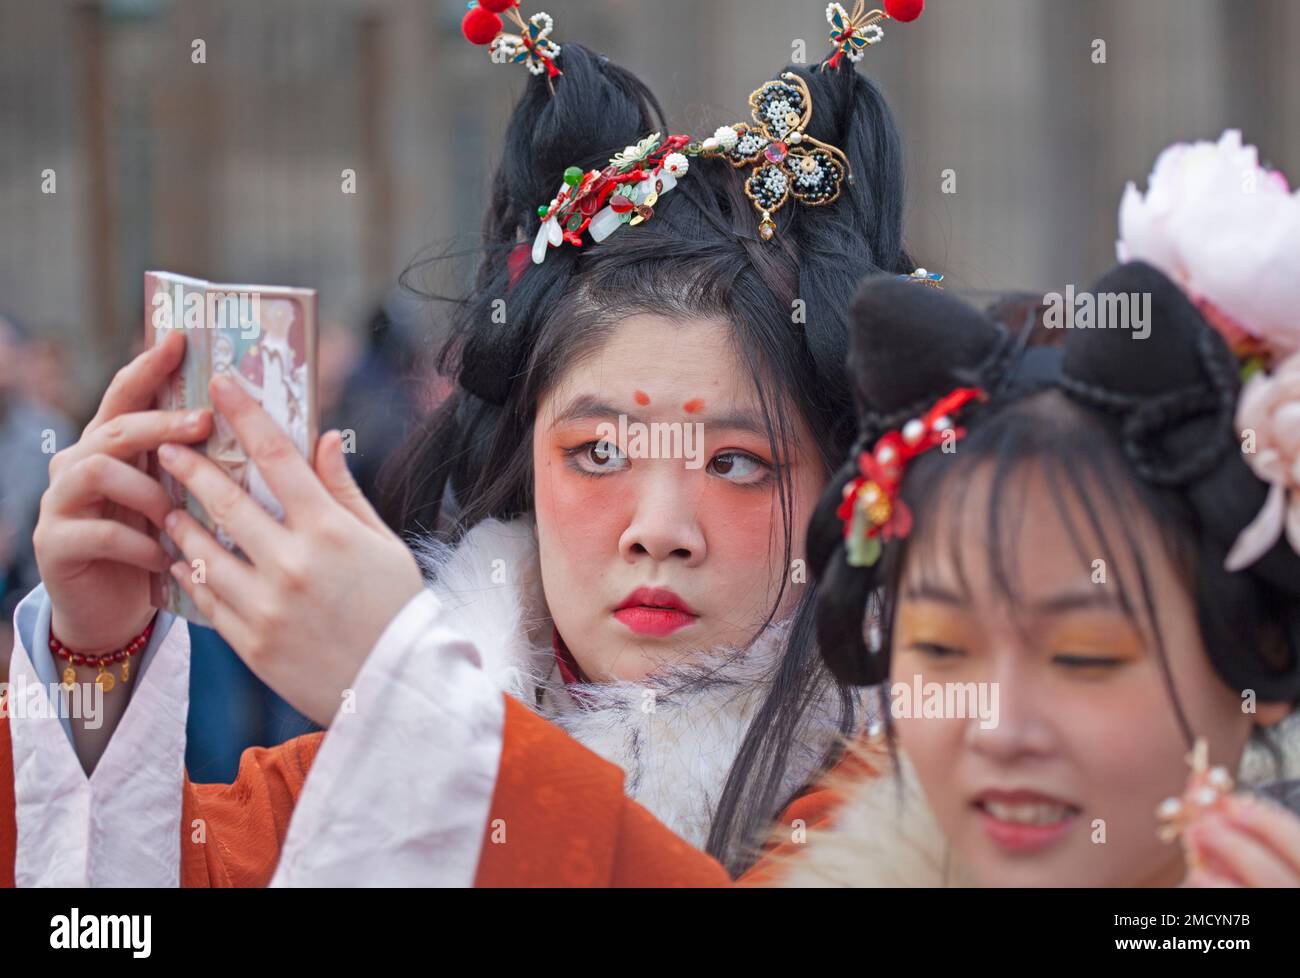 The Mound, Edinburgh, Scotland, UK. 22nd January 2023. Edinburgh city marks the Year of the Rabbit as the Chinese New Year launches today across the world. Pictured: Chinese performers prepare to perform for the audience. Credit: Arch White/alamy live news. Stock Photo